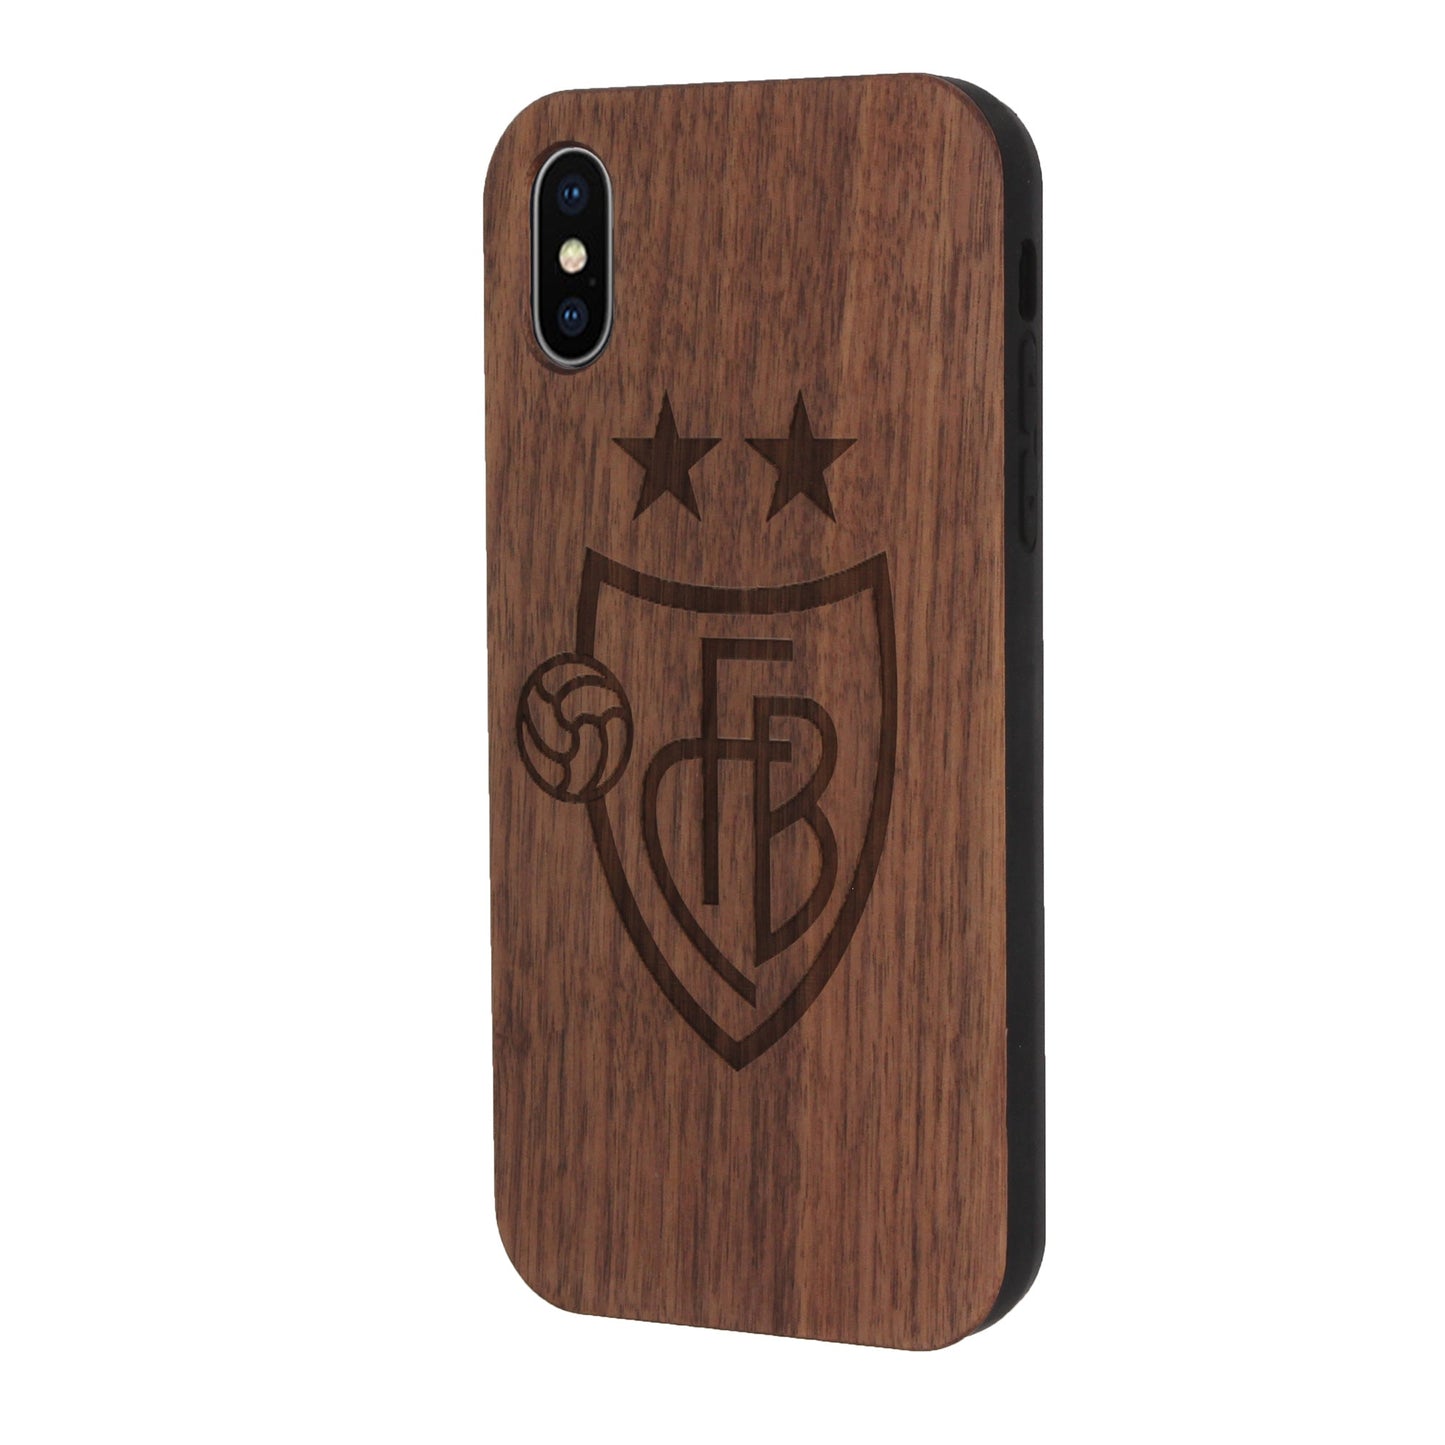 FCB Eden case made of walnut wood for iPhone XS Max